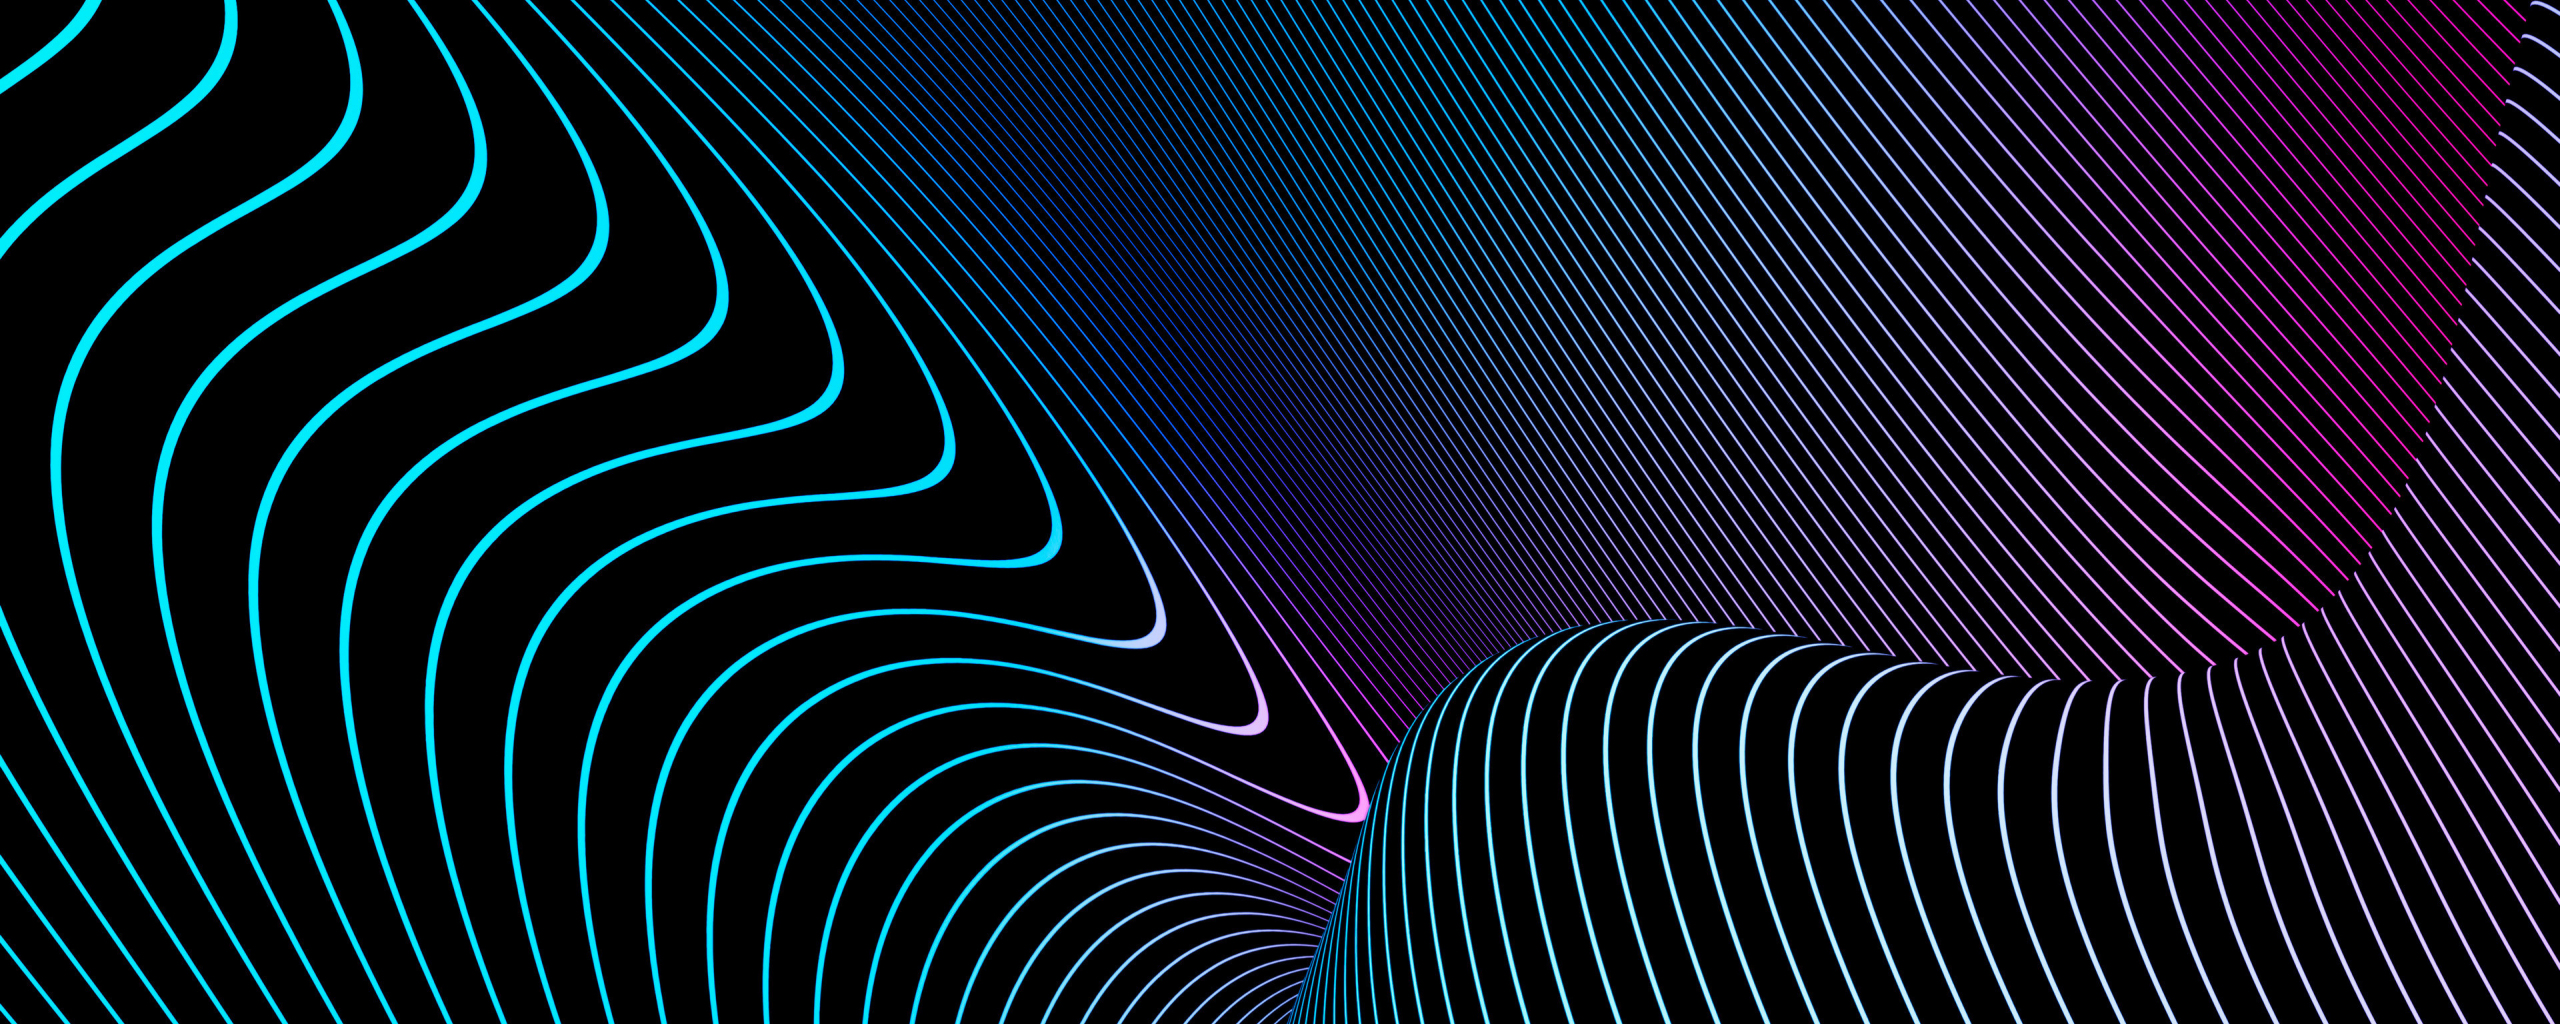 Download wallpaper 2560x1024 curves, lines, neon dark, wrap, dual wide 21:9  2560x1024 hd background, 9982